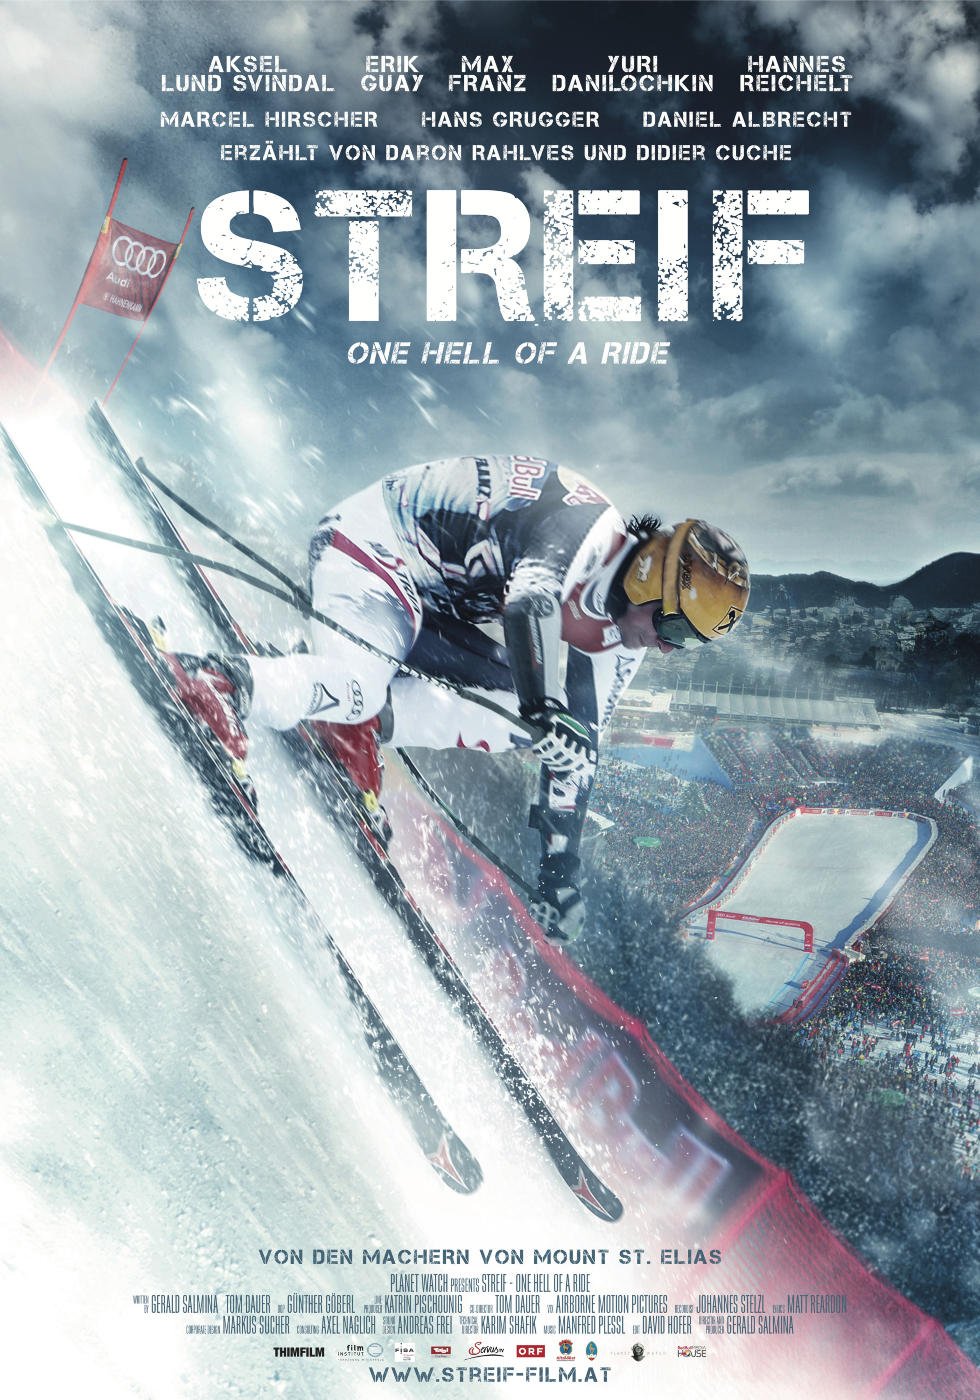 L'affiche du film Streif: One Hell of a Ride